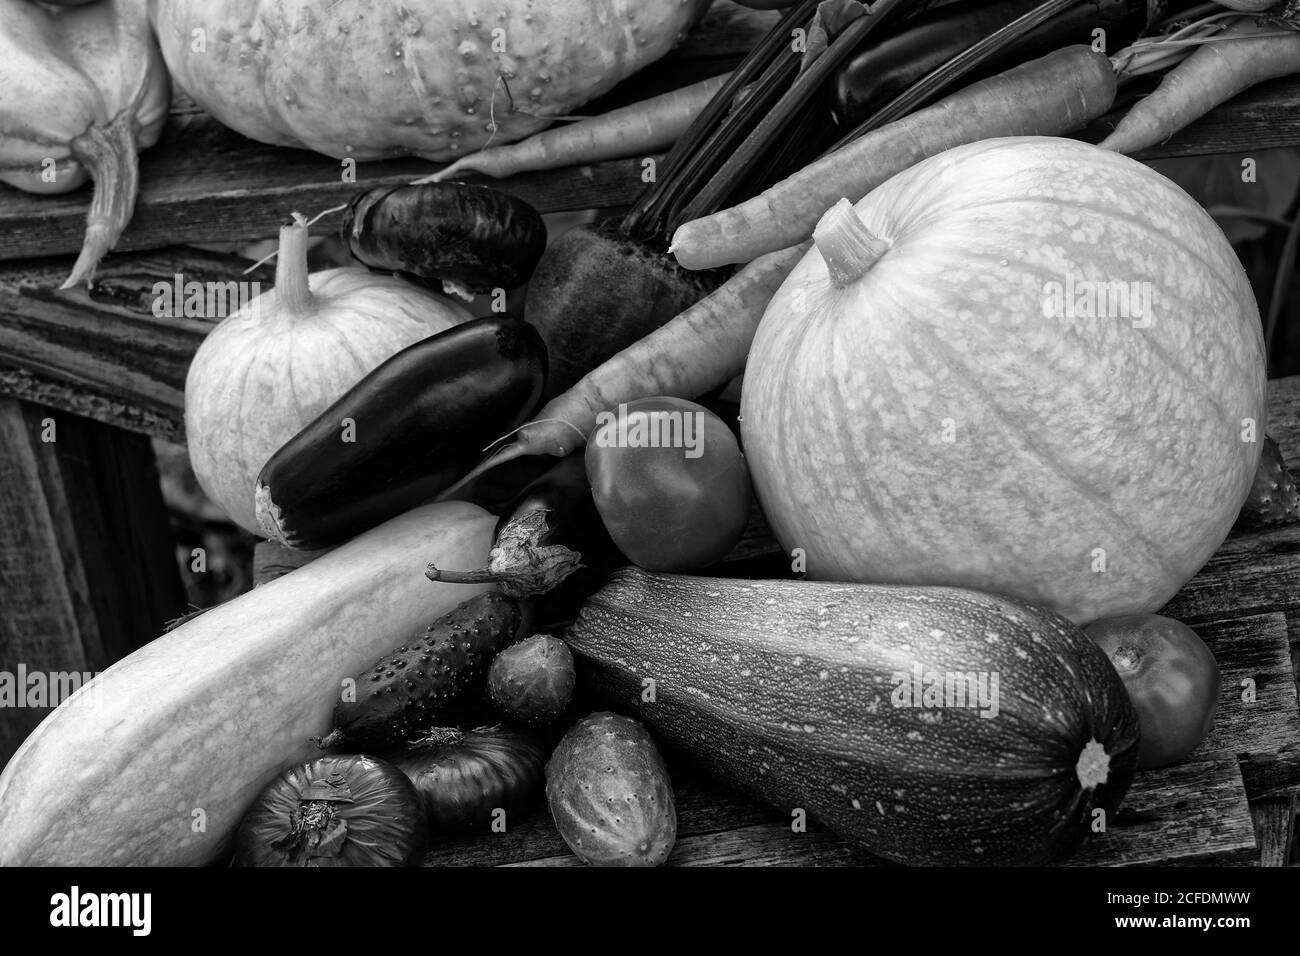 Photo vegetables,tomatoes, onions, red onions, eggplants, beets, pumpkins Stock Photo